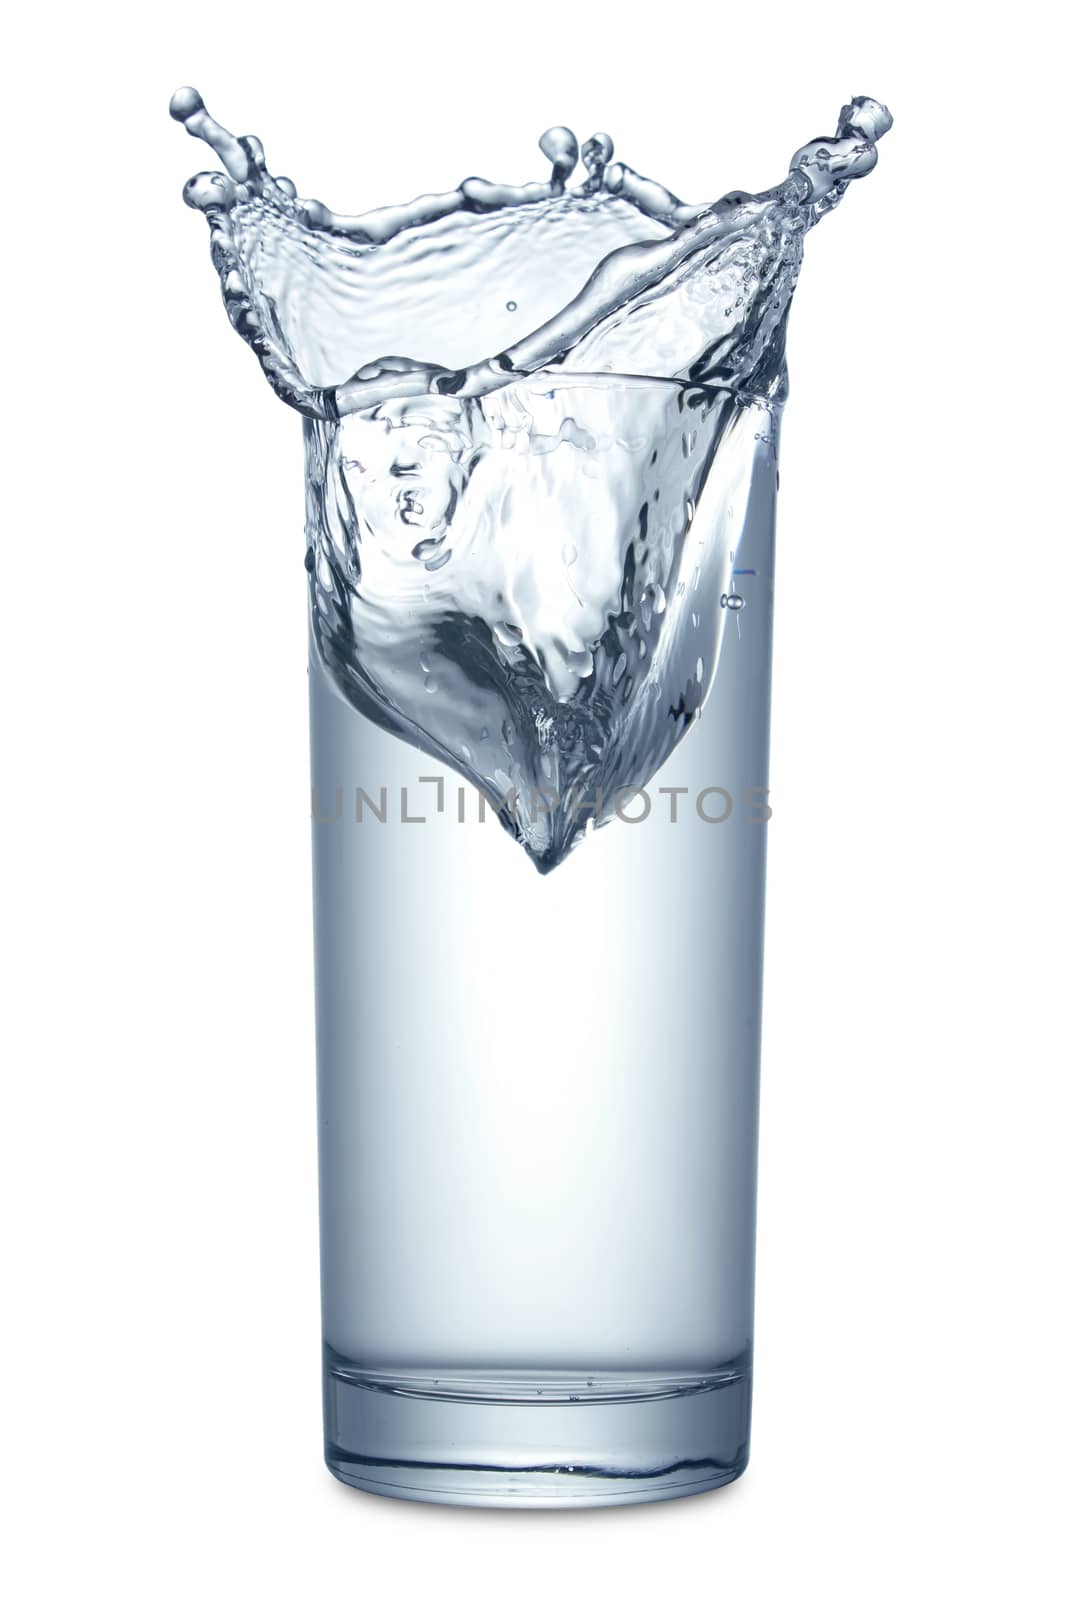 Wated splashing in glass on white background, isolated